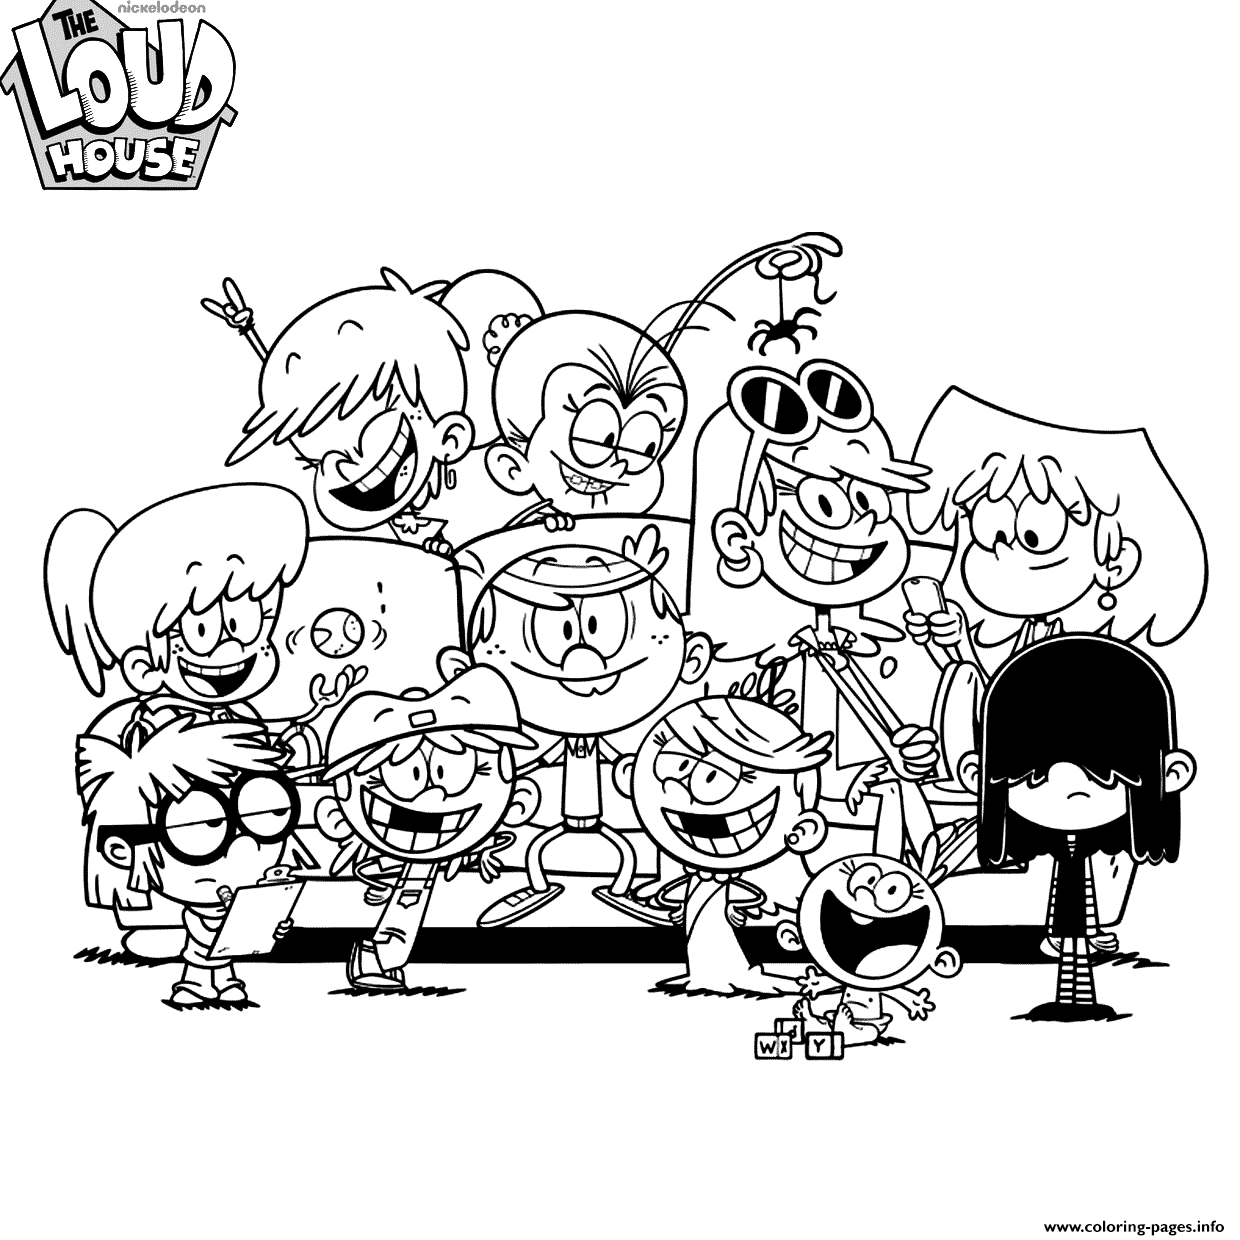 The Loud House Coloring Pages Printable